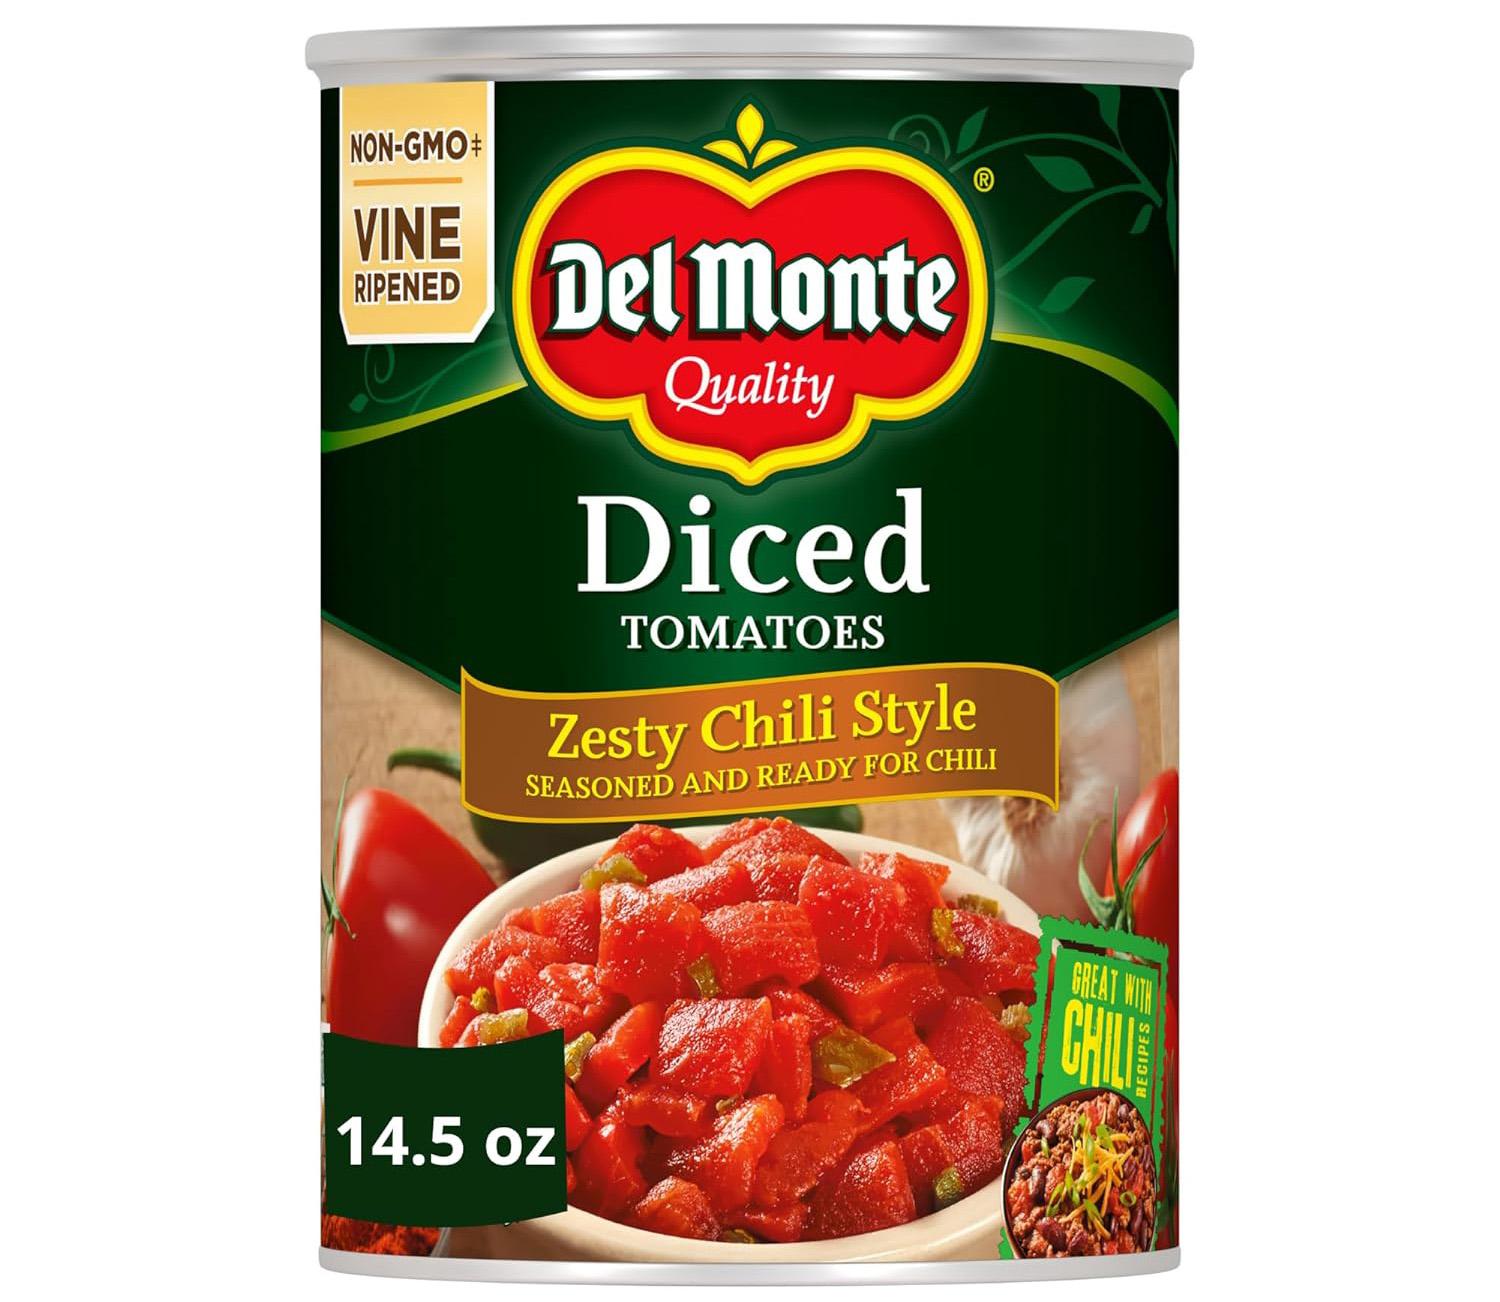 Del Monte Canned Diced Tomatoes Zesty Chili Style for $0.78